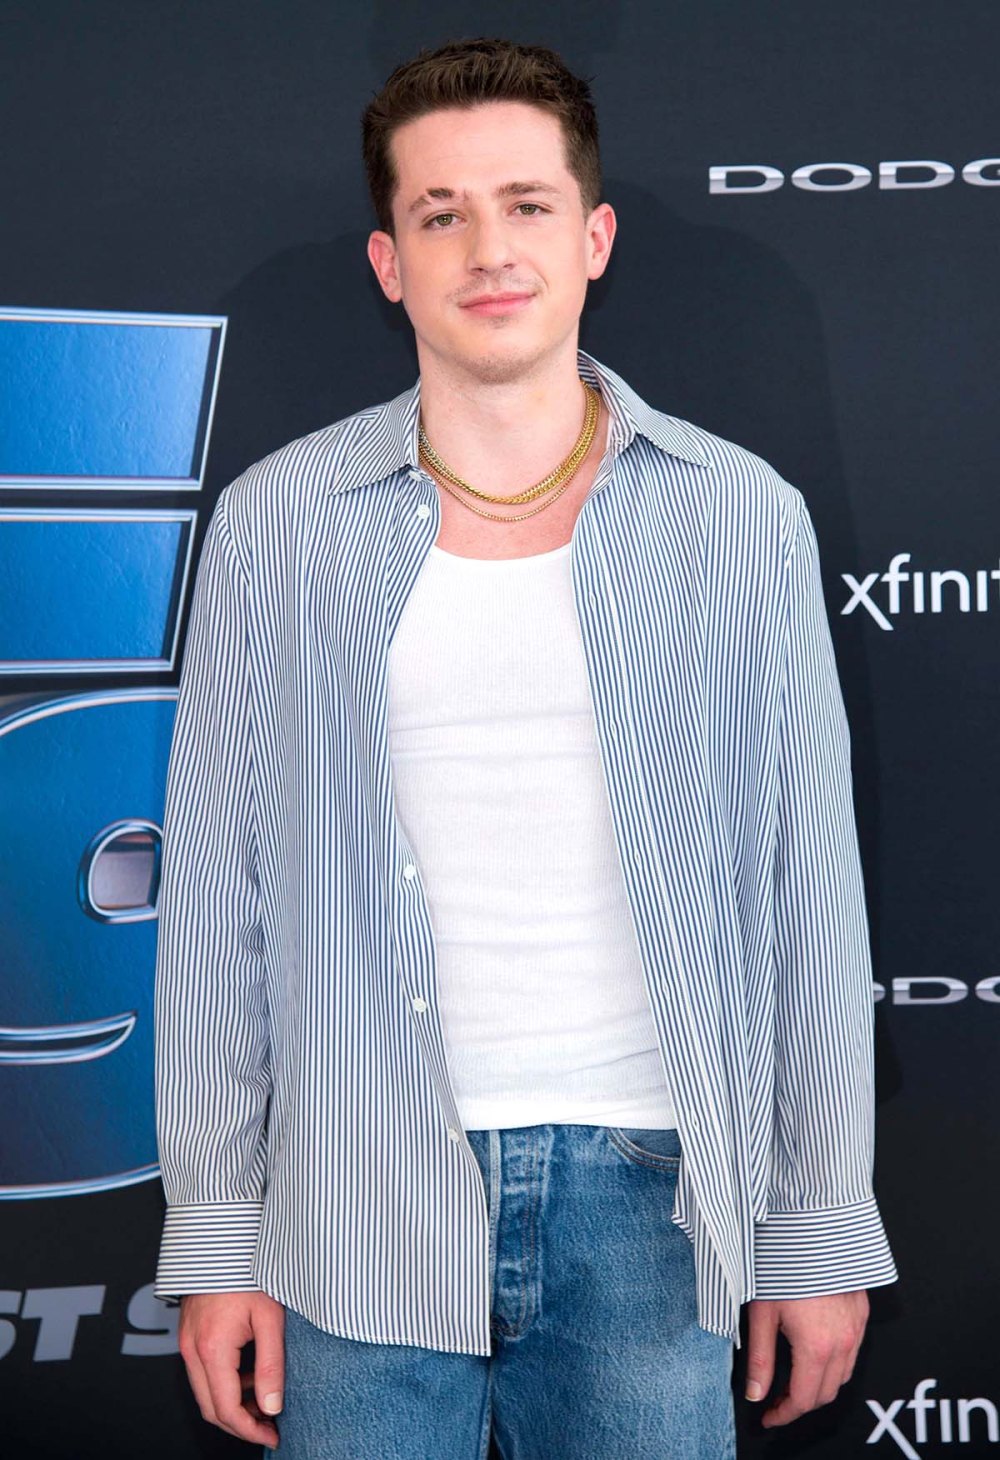 Charlie Puth Says Its His Fault When Fans Speculate About His Personal Life